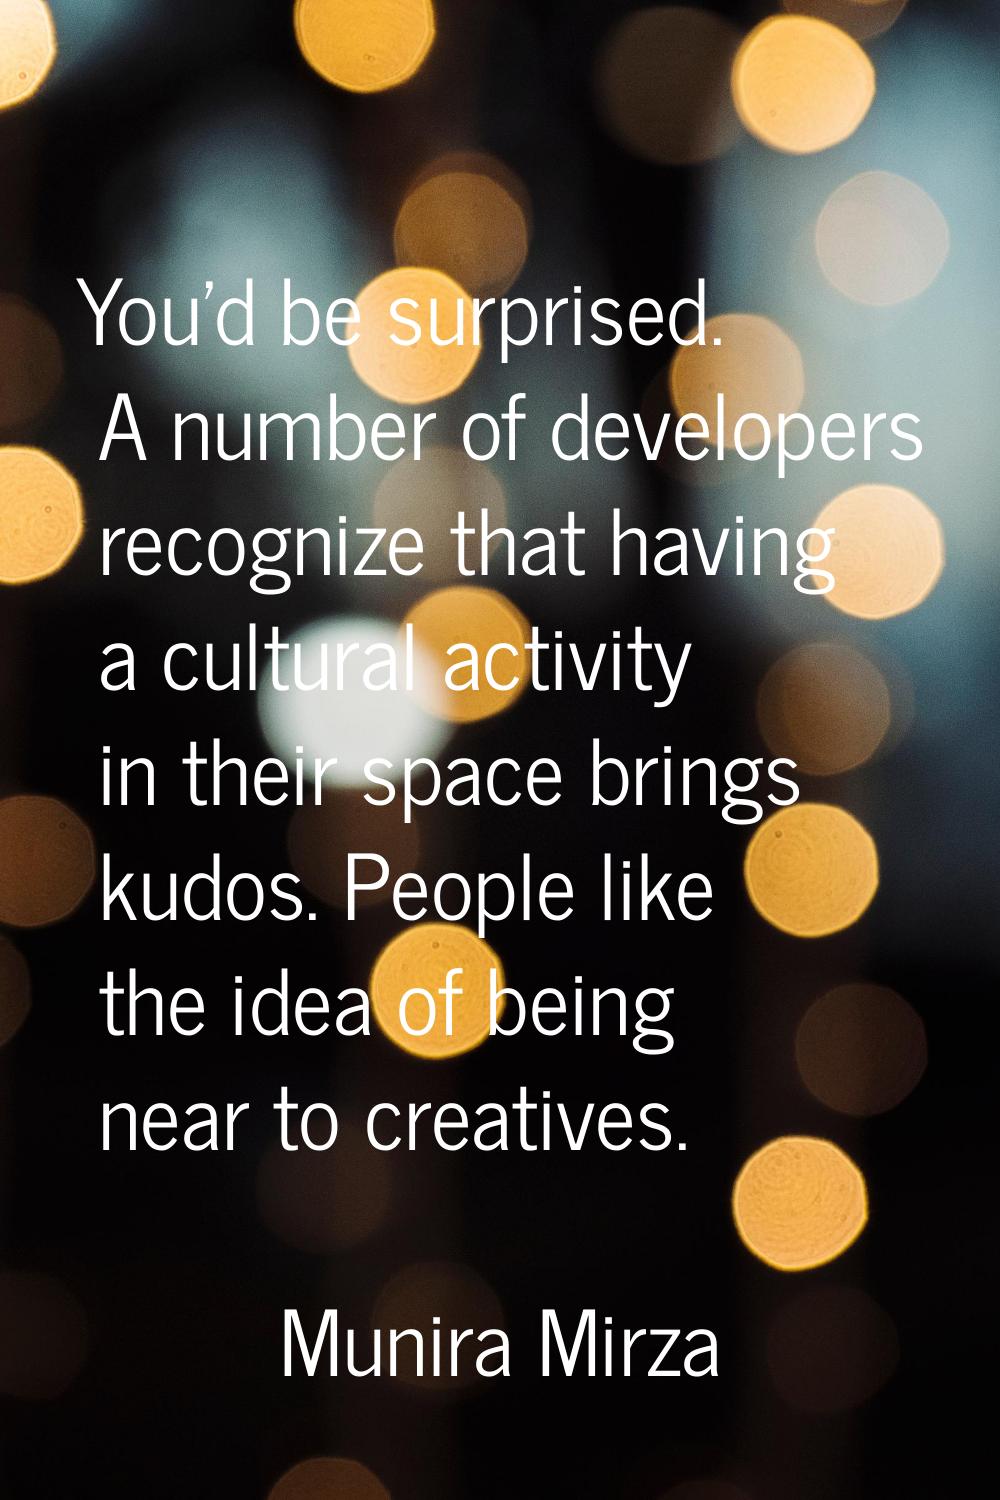 You'd be surprised. A number of developers recognize that having a cultural activity in their space